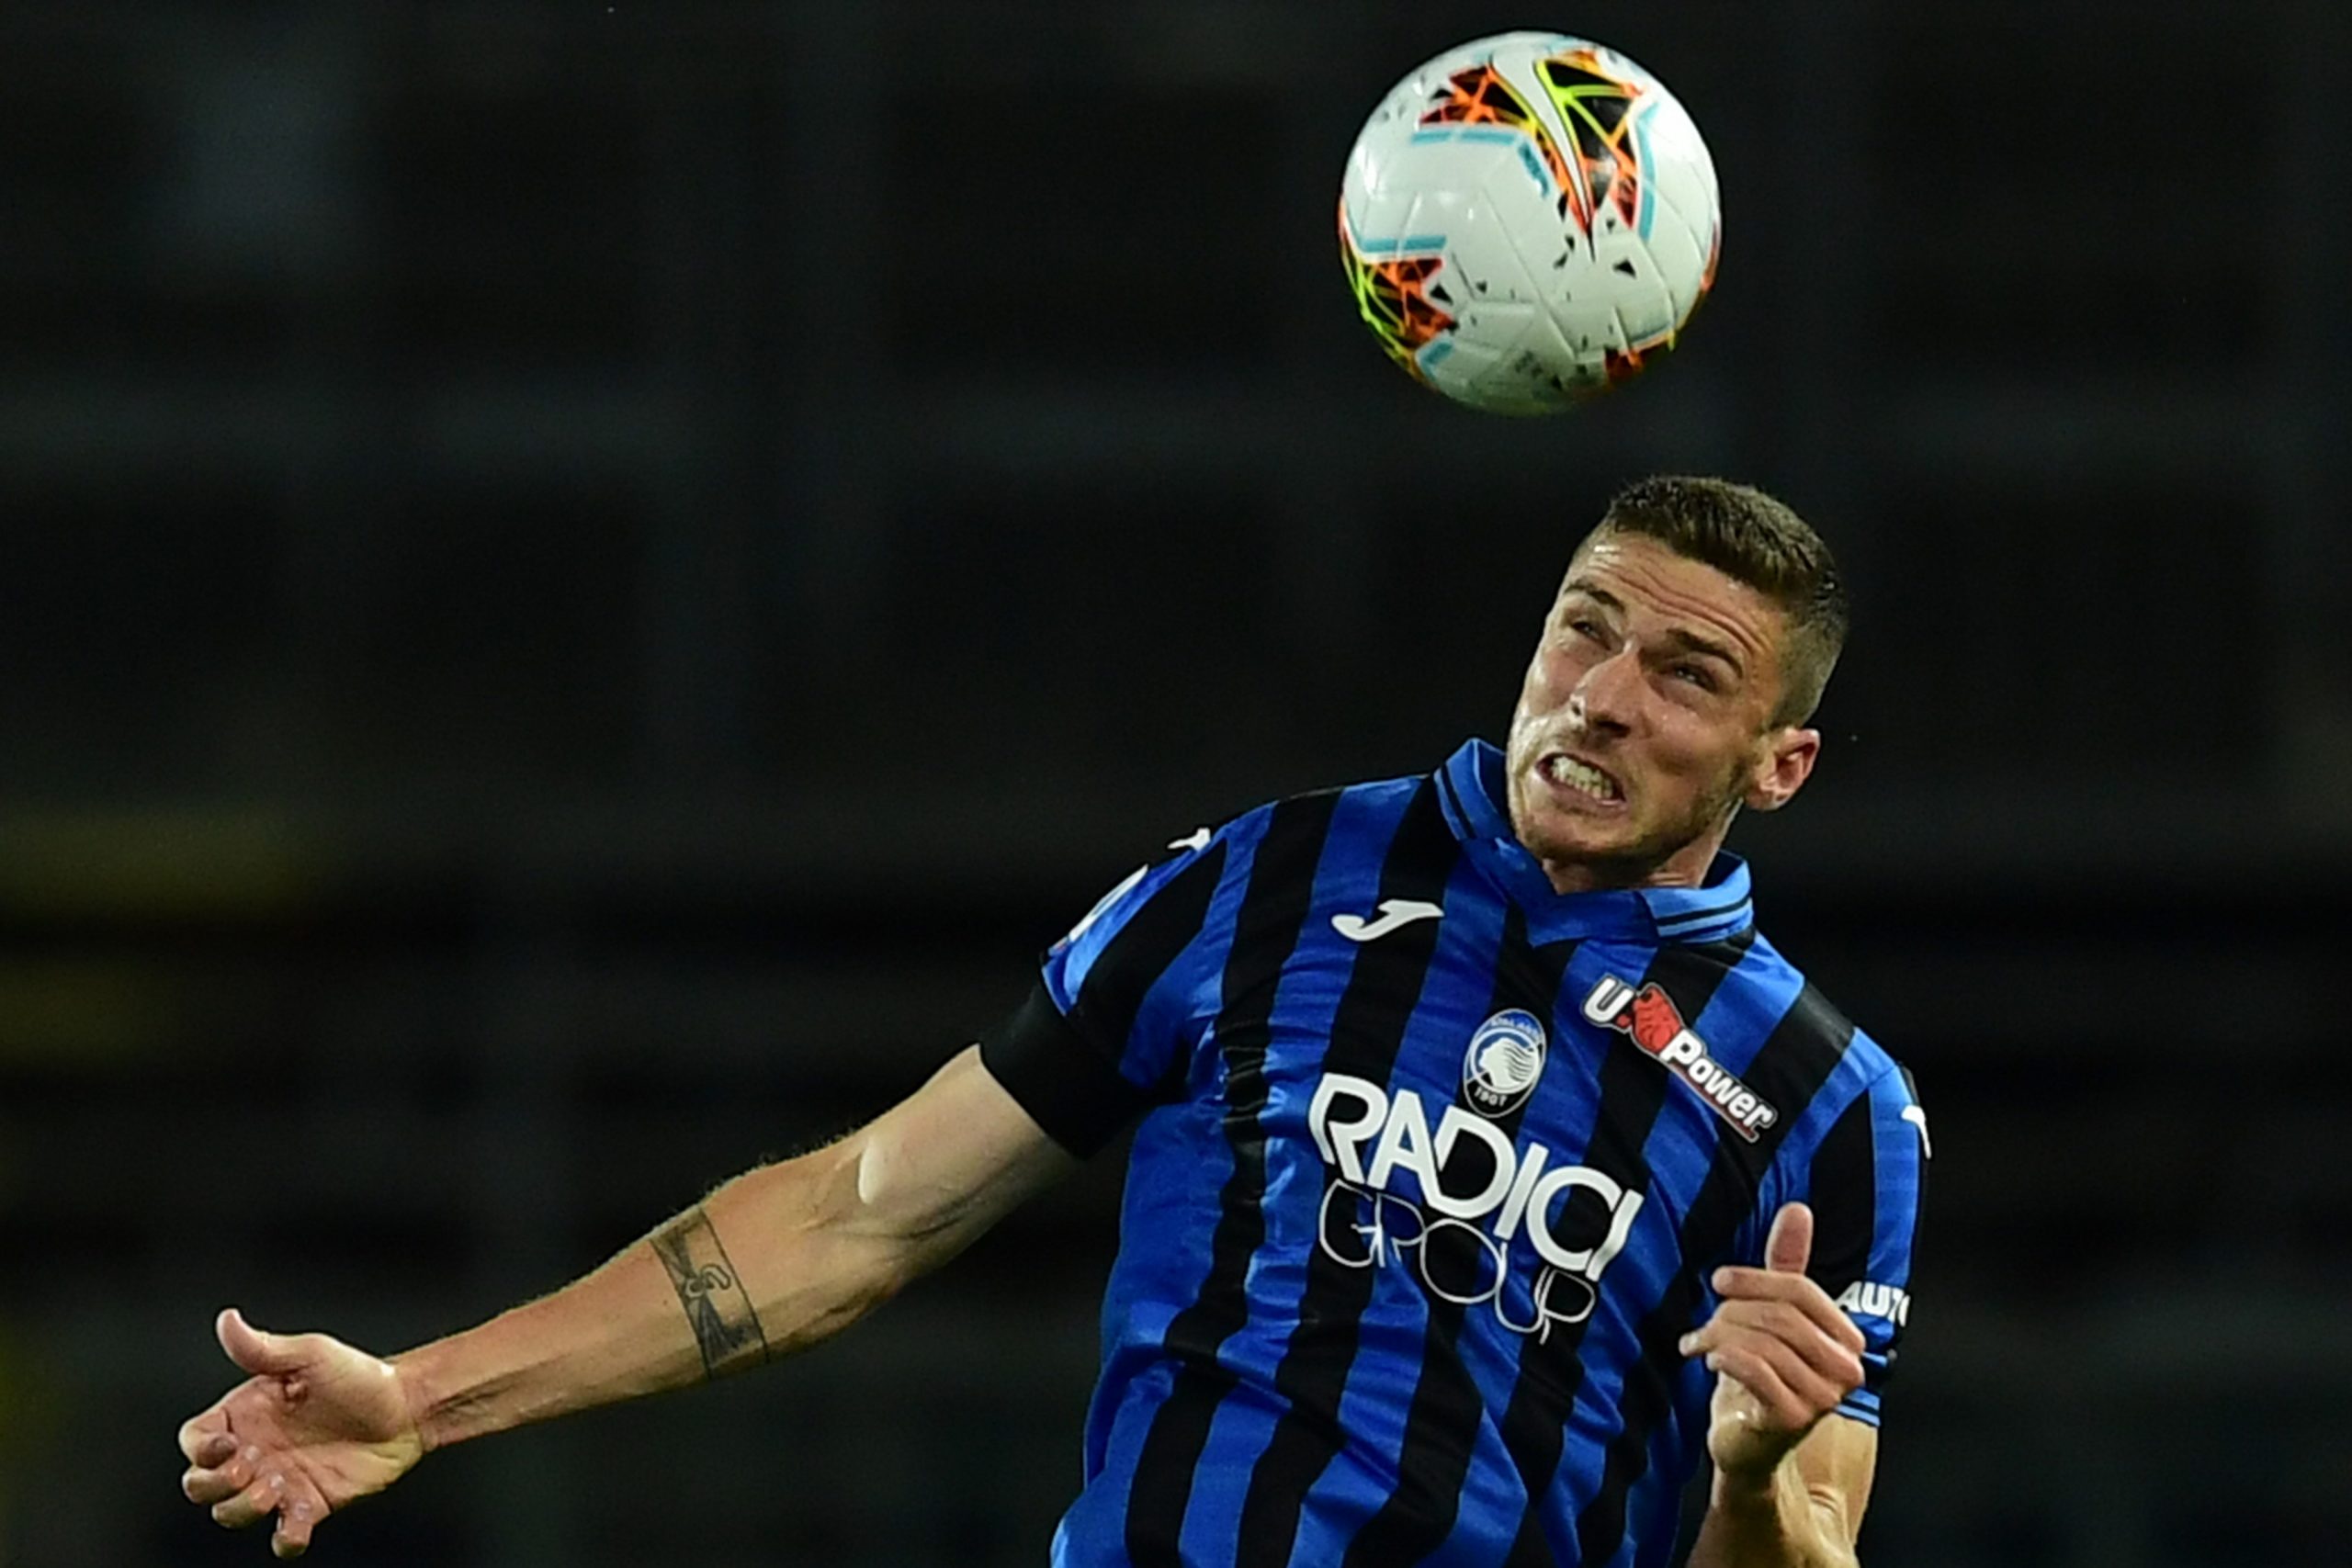 Robin Gosens enjoyed a superb 2019/20 campaign with Atalanta (Getty Images)